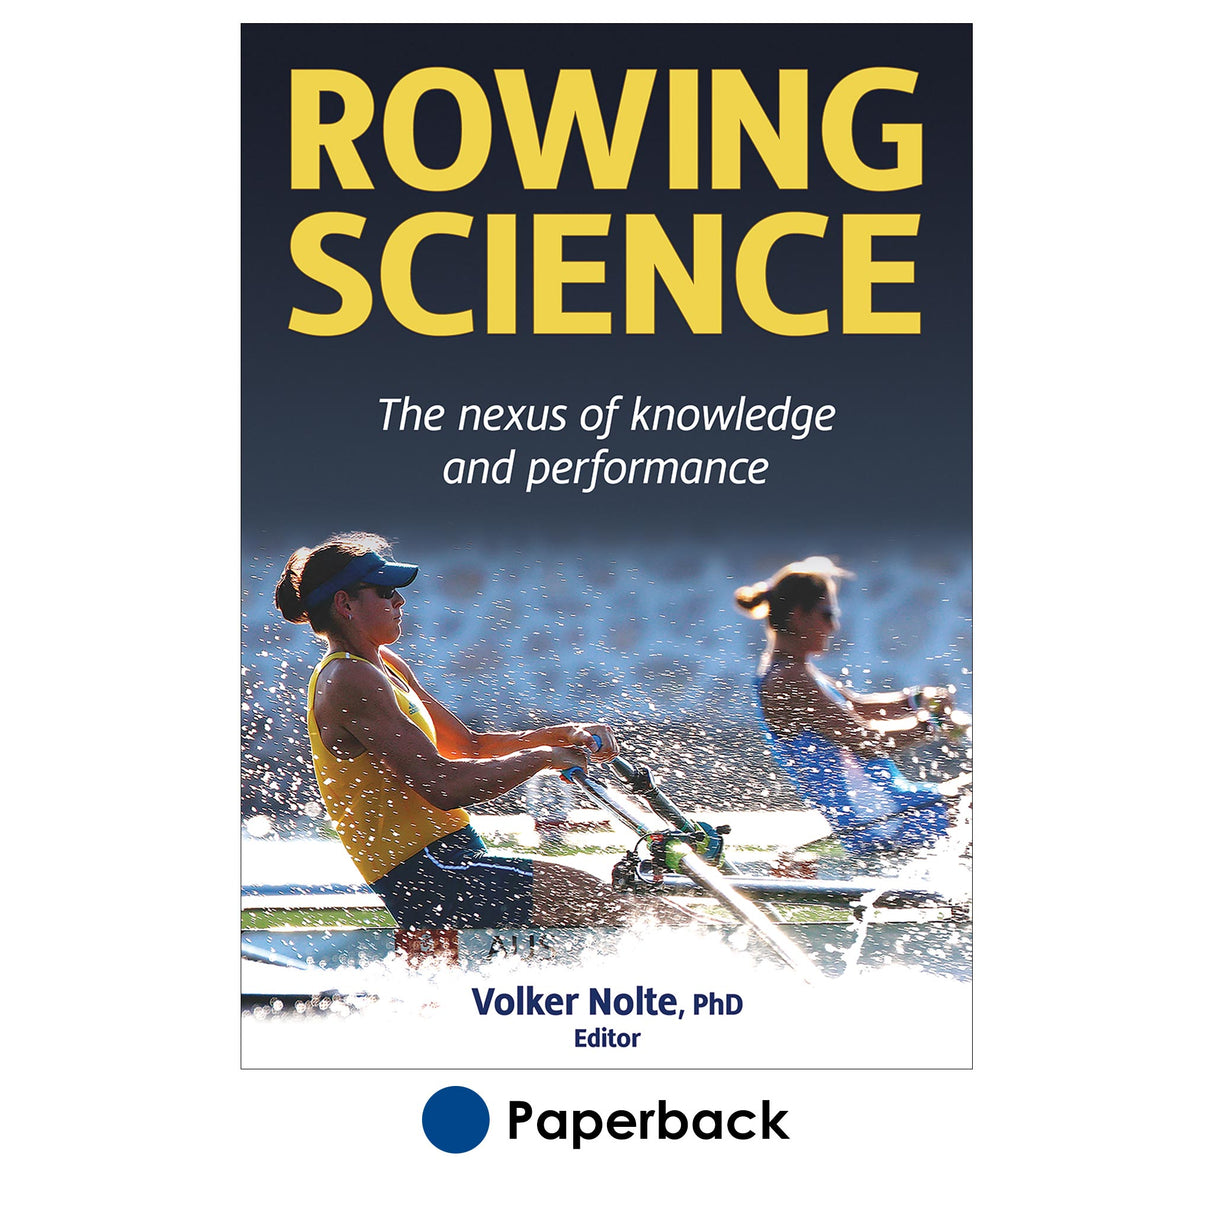 Rowing Science